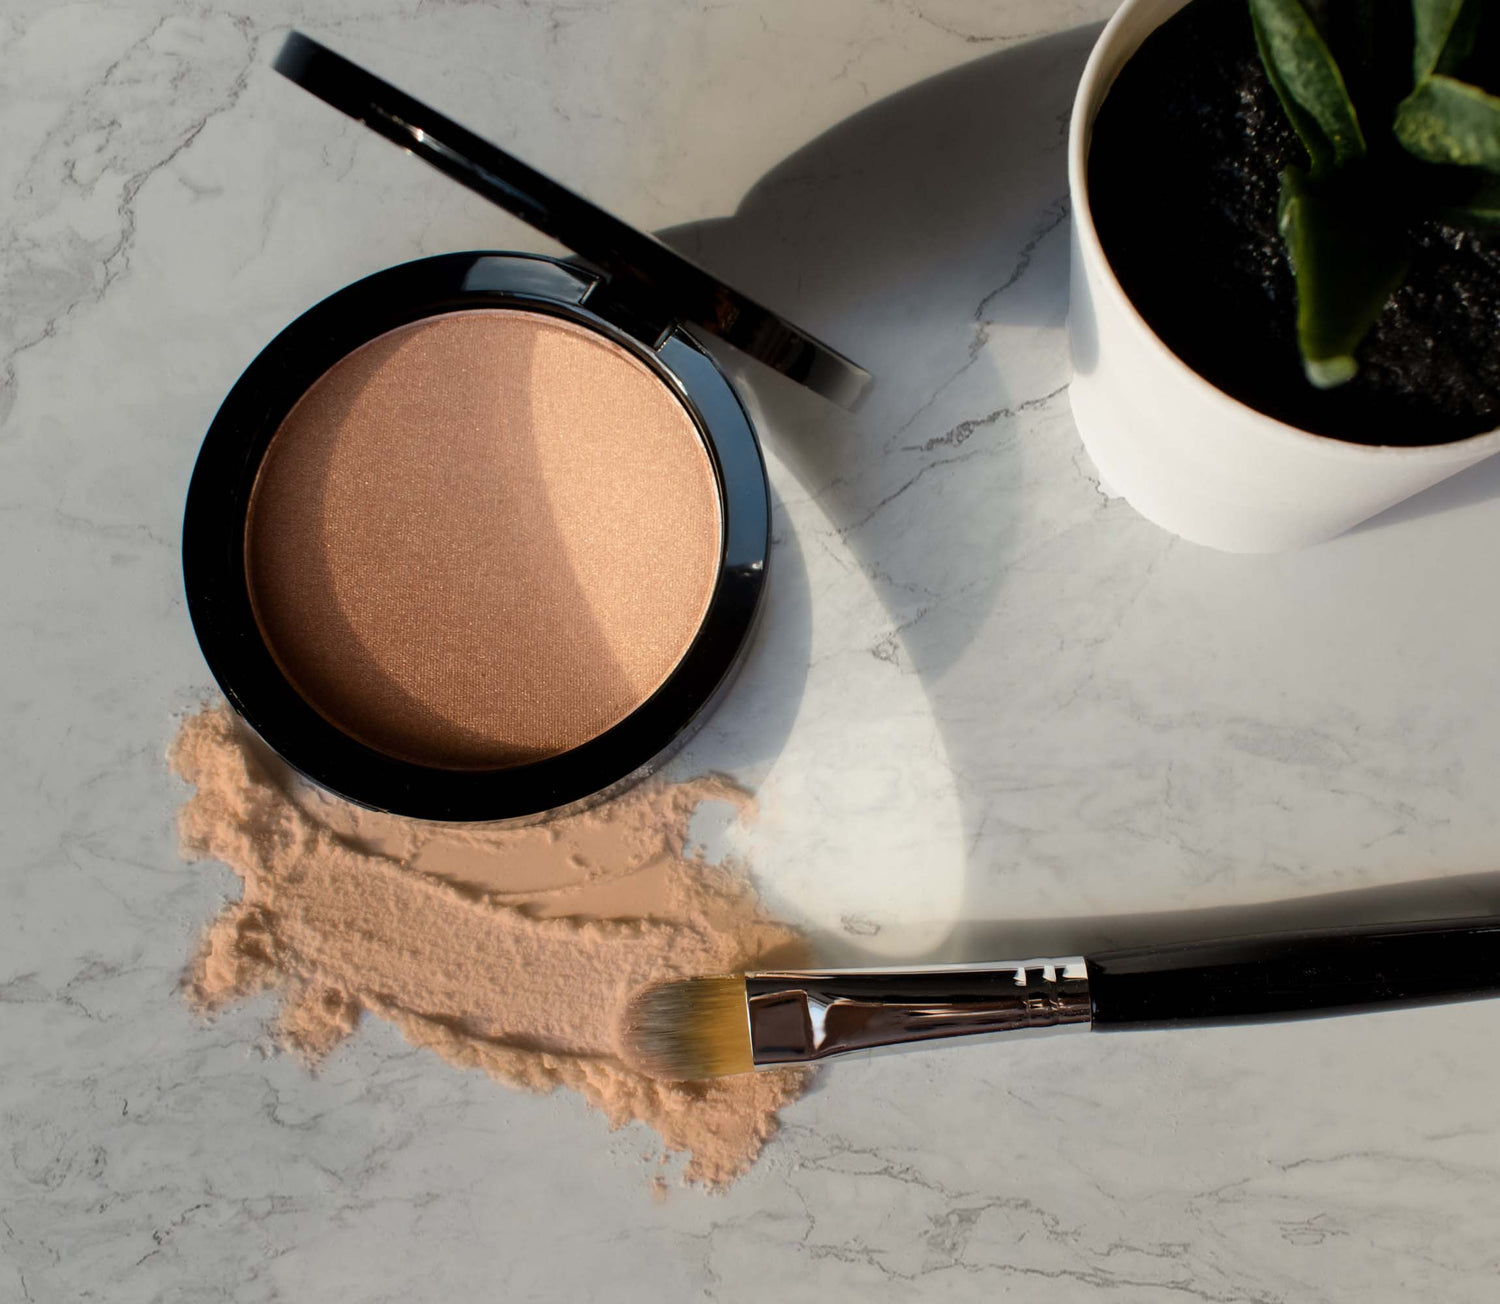 Enhance your natural radiance with Cruisin Organics Luminizing Powder. - Suitable for all skin types, this vegan powder leaves a silky, dewy finish. - Apply with fingertips for a luminous, diffused look or for a high impact glow.